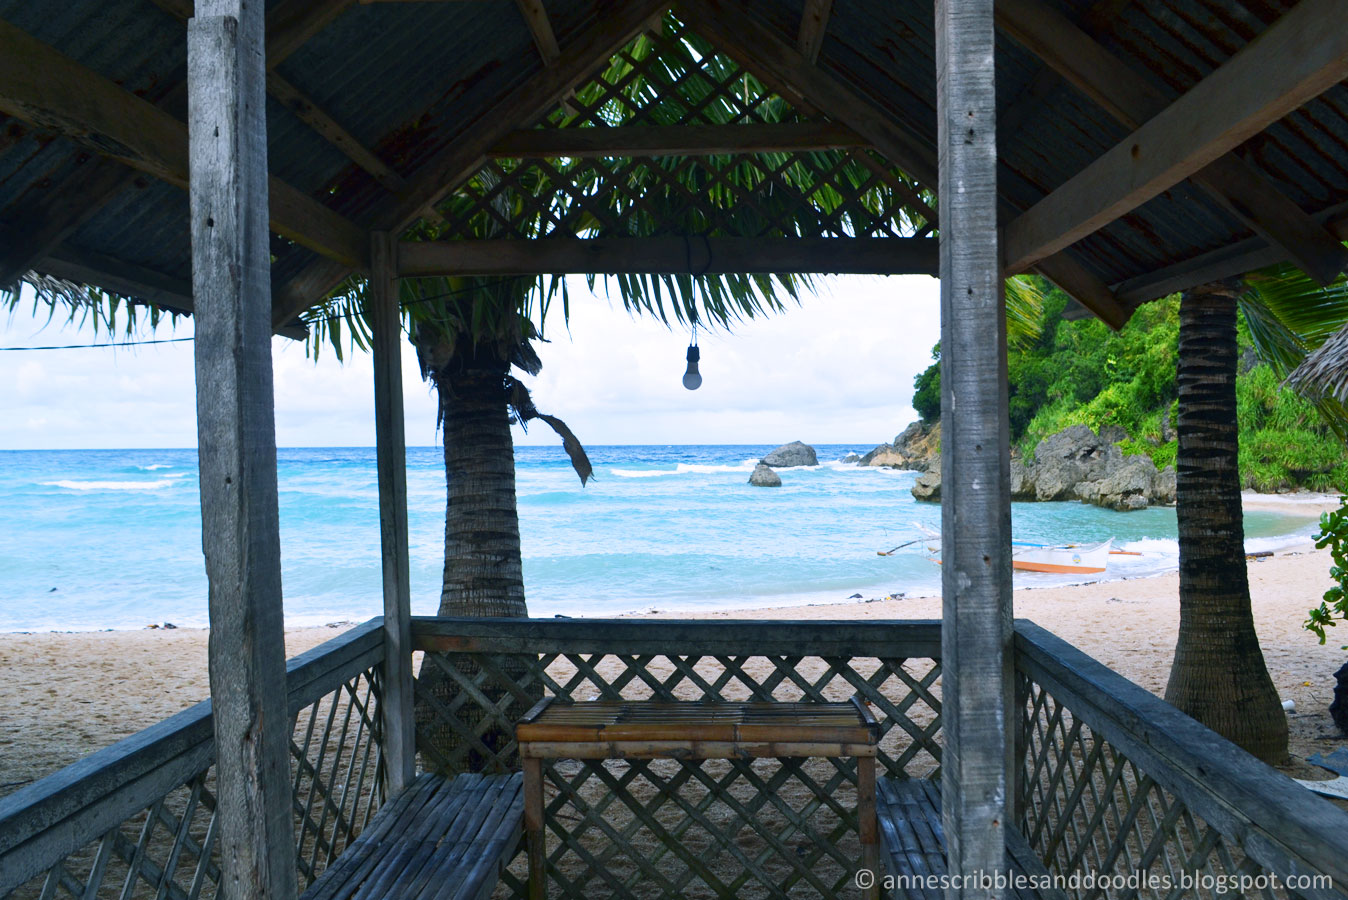 Travel Diary: Binucot Beach, Romblon Philippines | Anne's Scribbles and Doodles